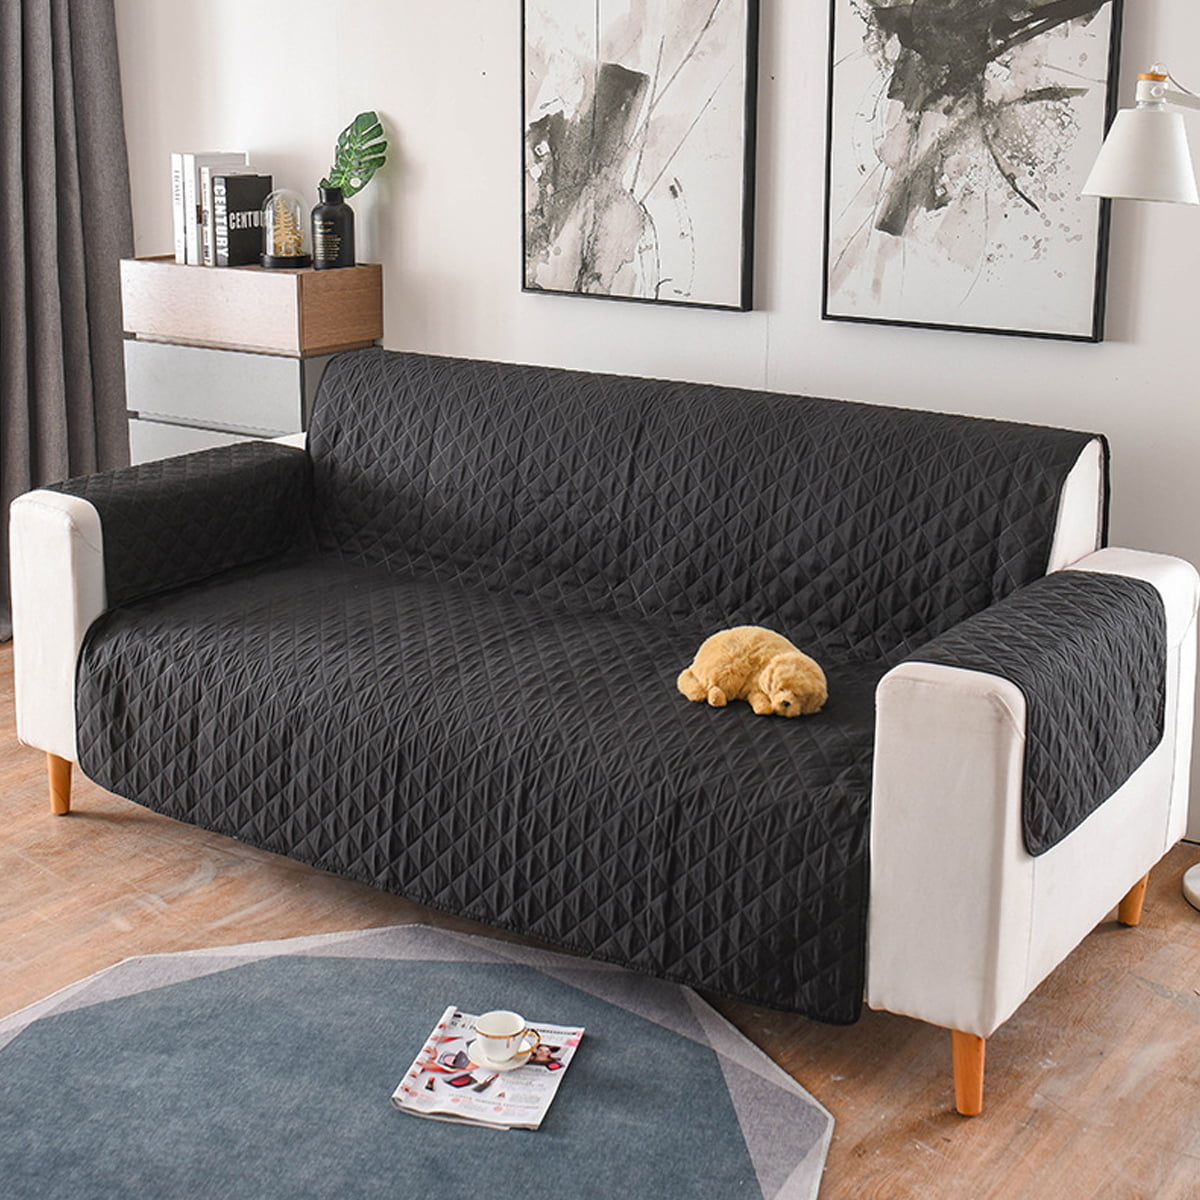 Extra Wide Sofa-Black / Grey Kids Dogs-Large Sofa Loveseat Superior Quality Reversible Large Couch Cover 118 X 76-Furniture Protector For Pets Standard Sofa Recliner and Chair